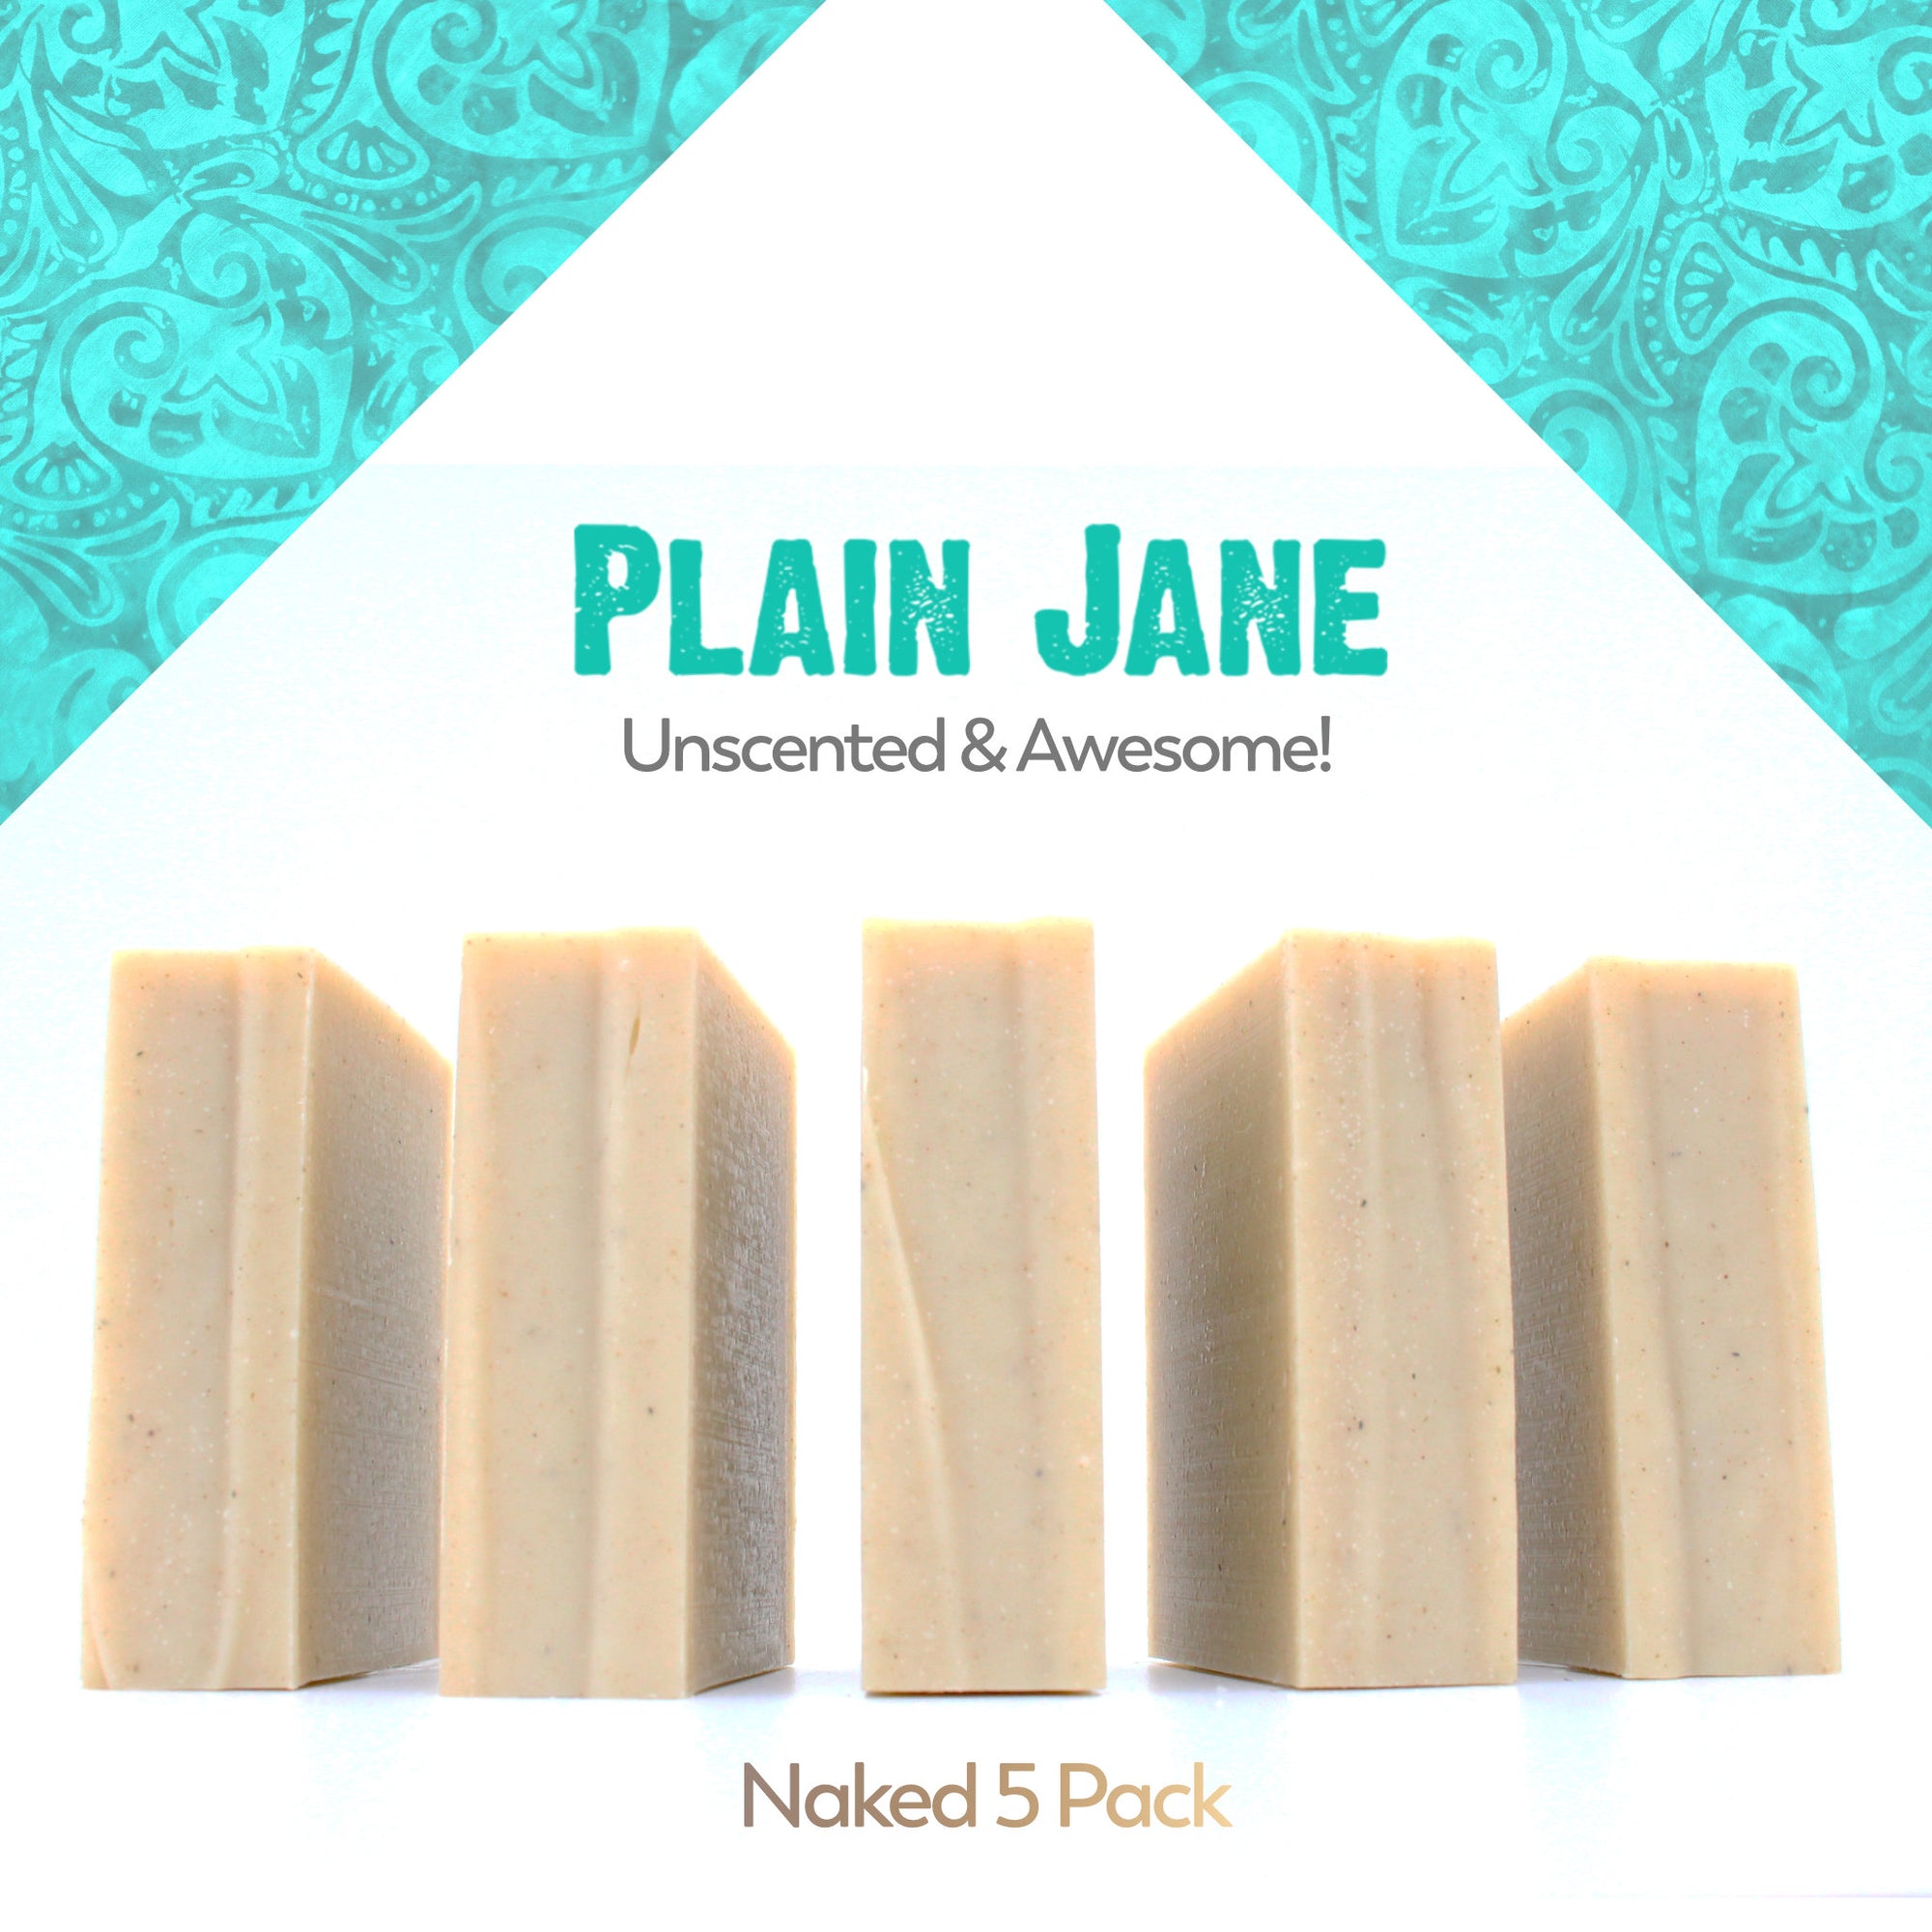 A naked five pack of Plain Jane Unscented organic bar soap from ground Soap.